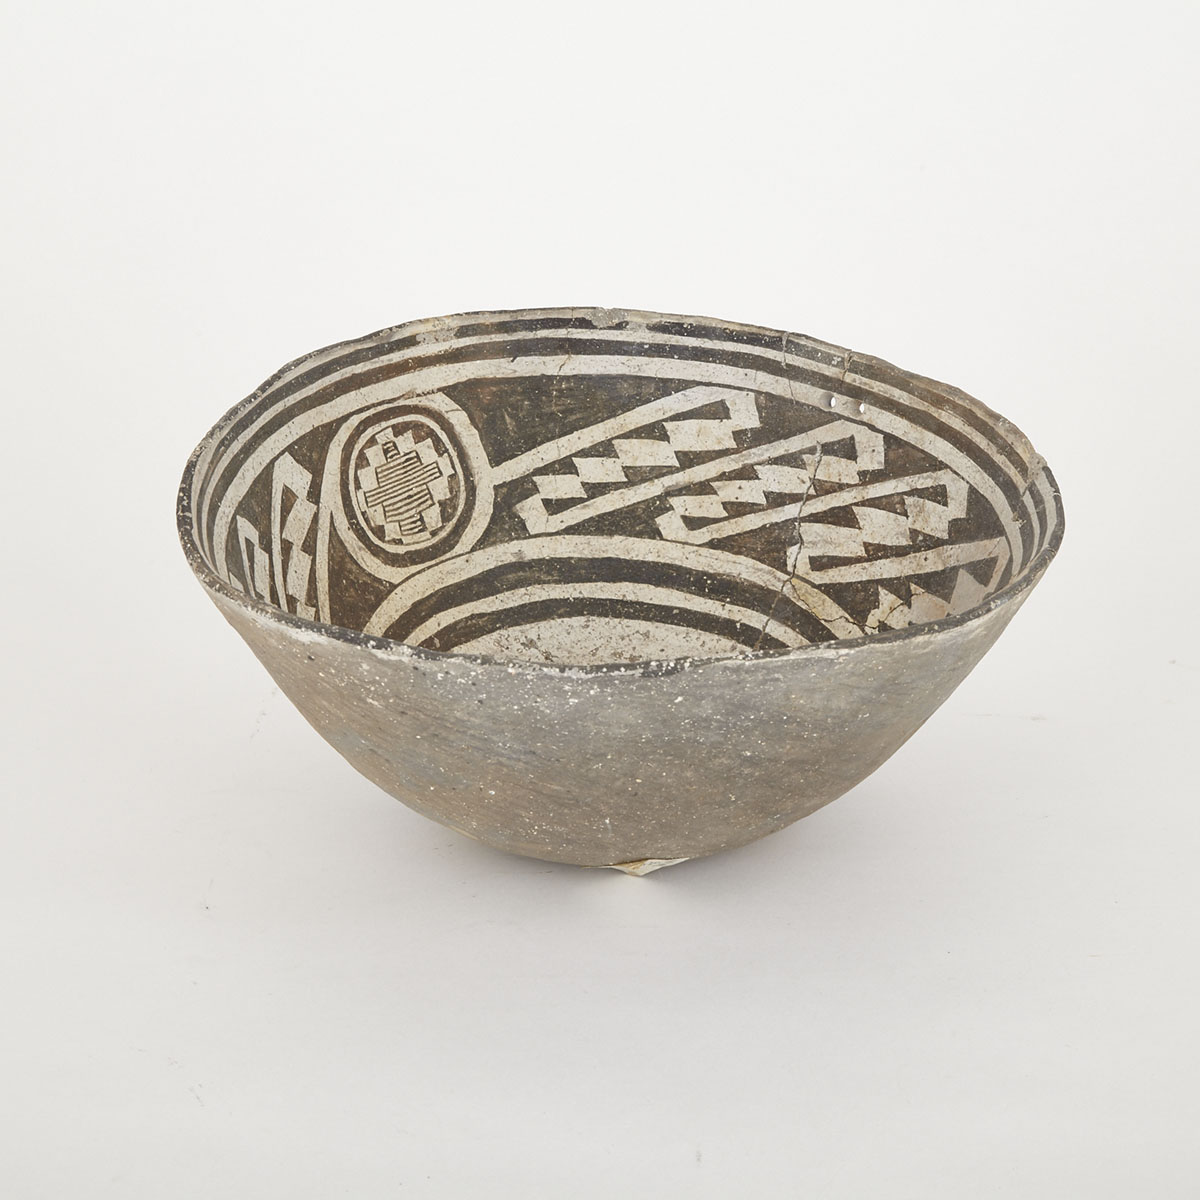 Black-on-White Pottery Bowl, possibly Mimbres, New Mexico